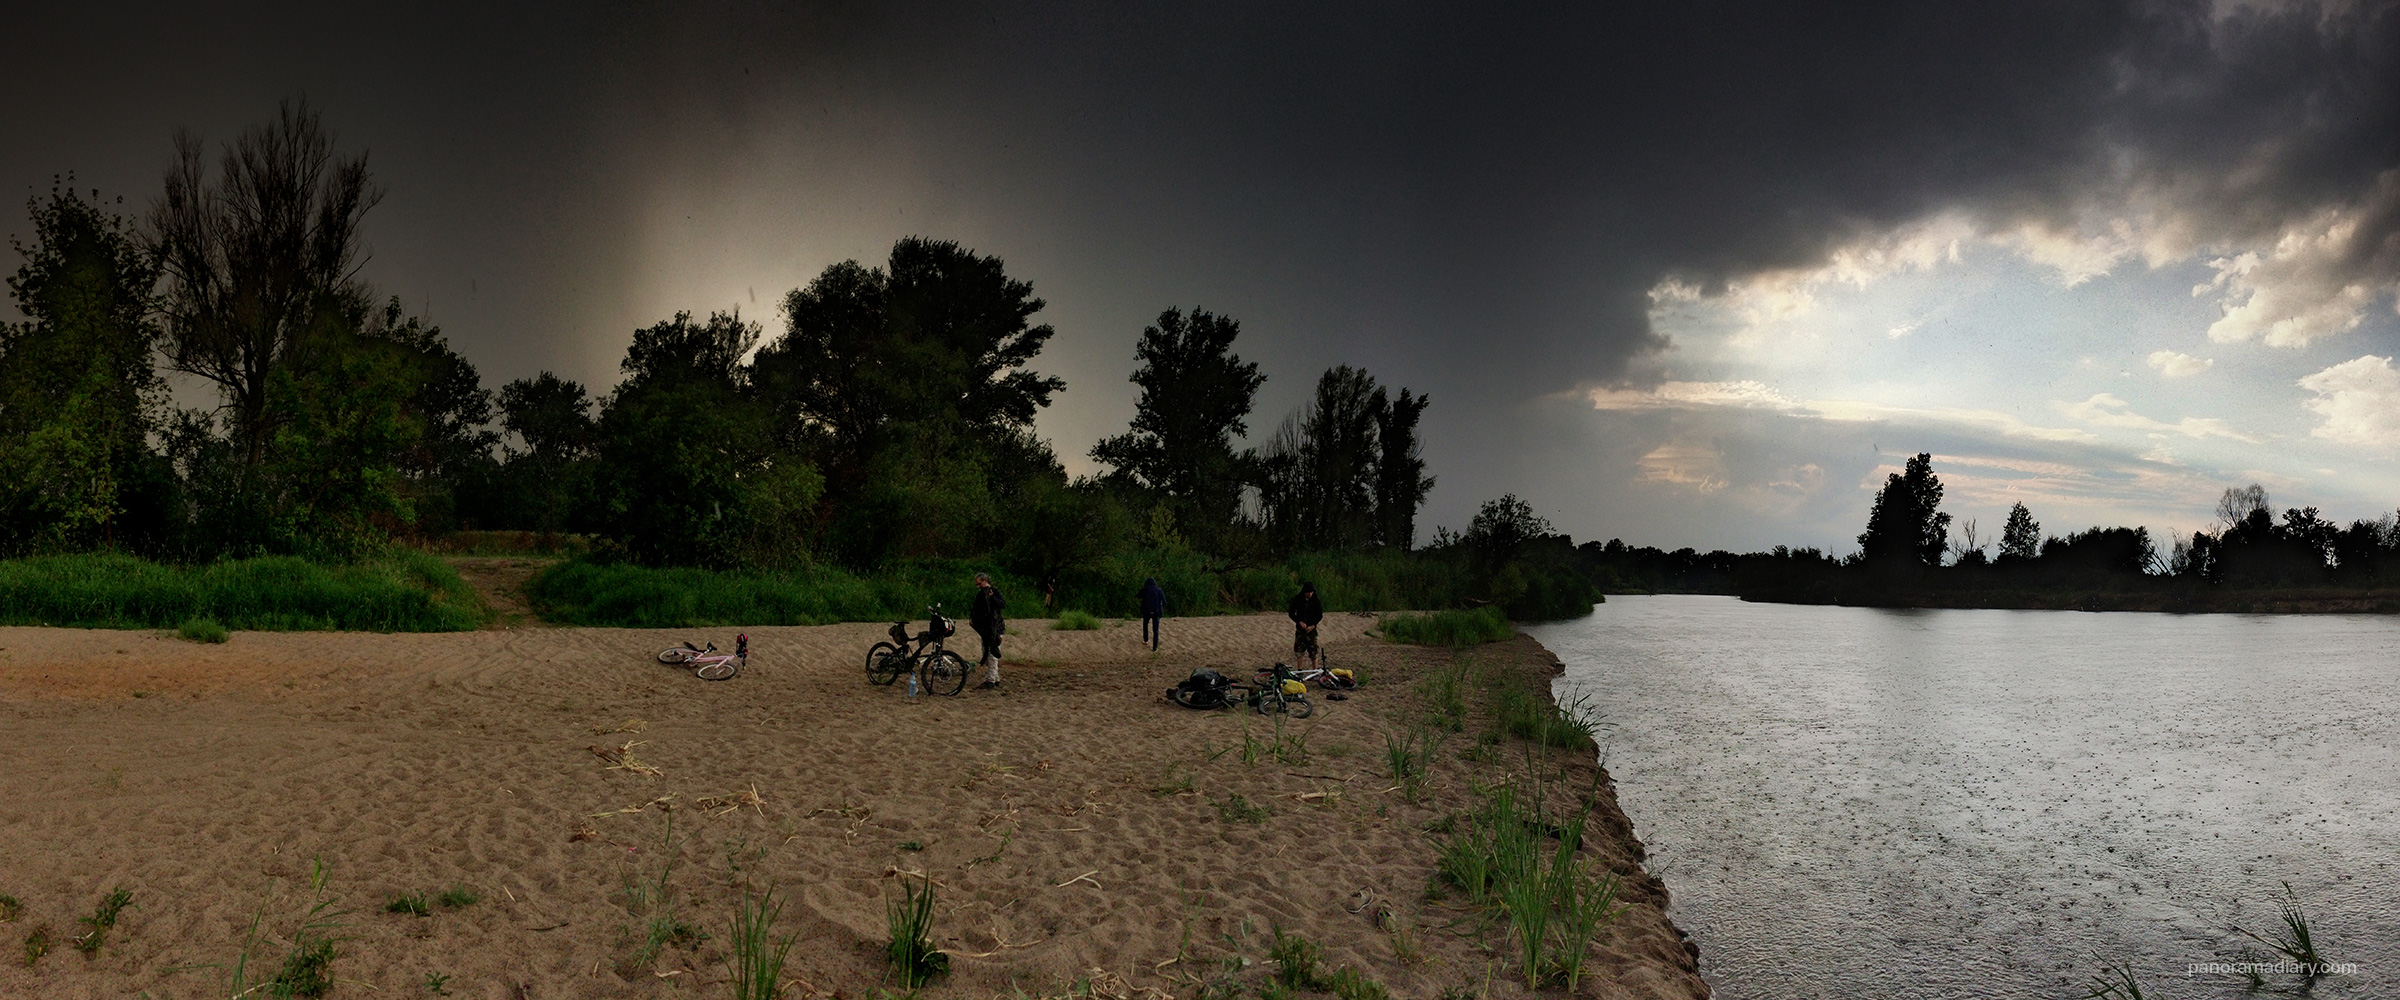 PANORAMA DIARY | Storm over Pilica river